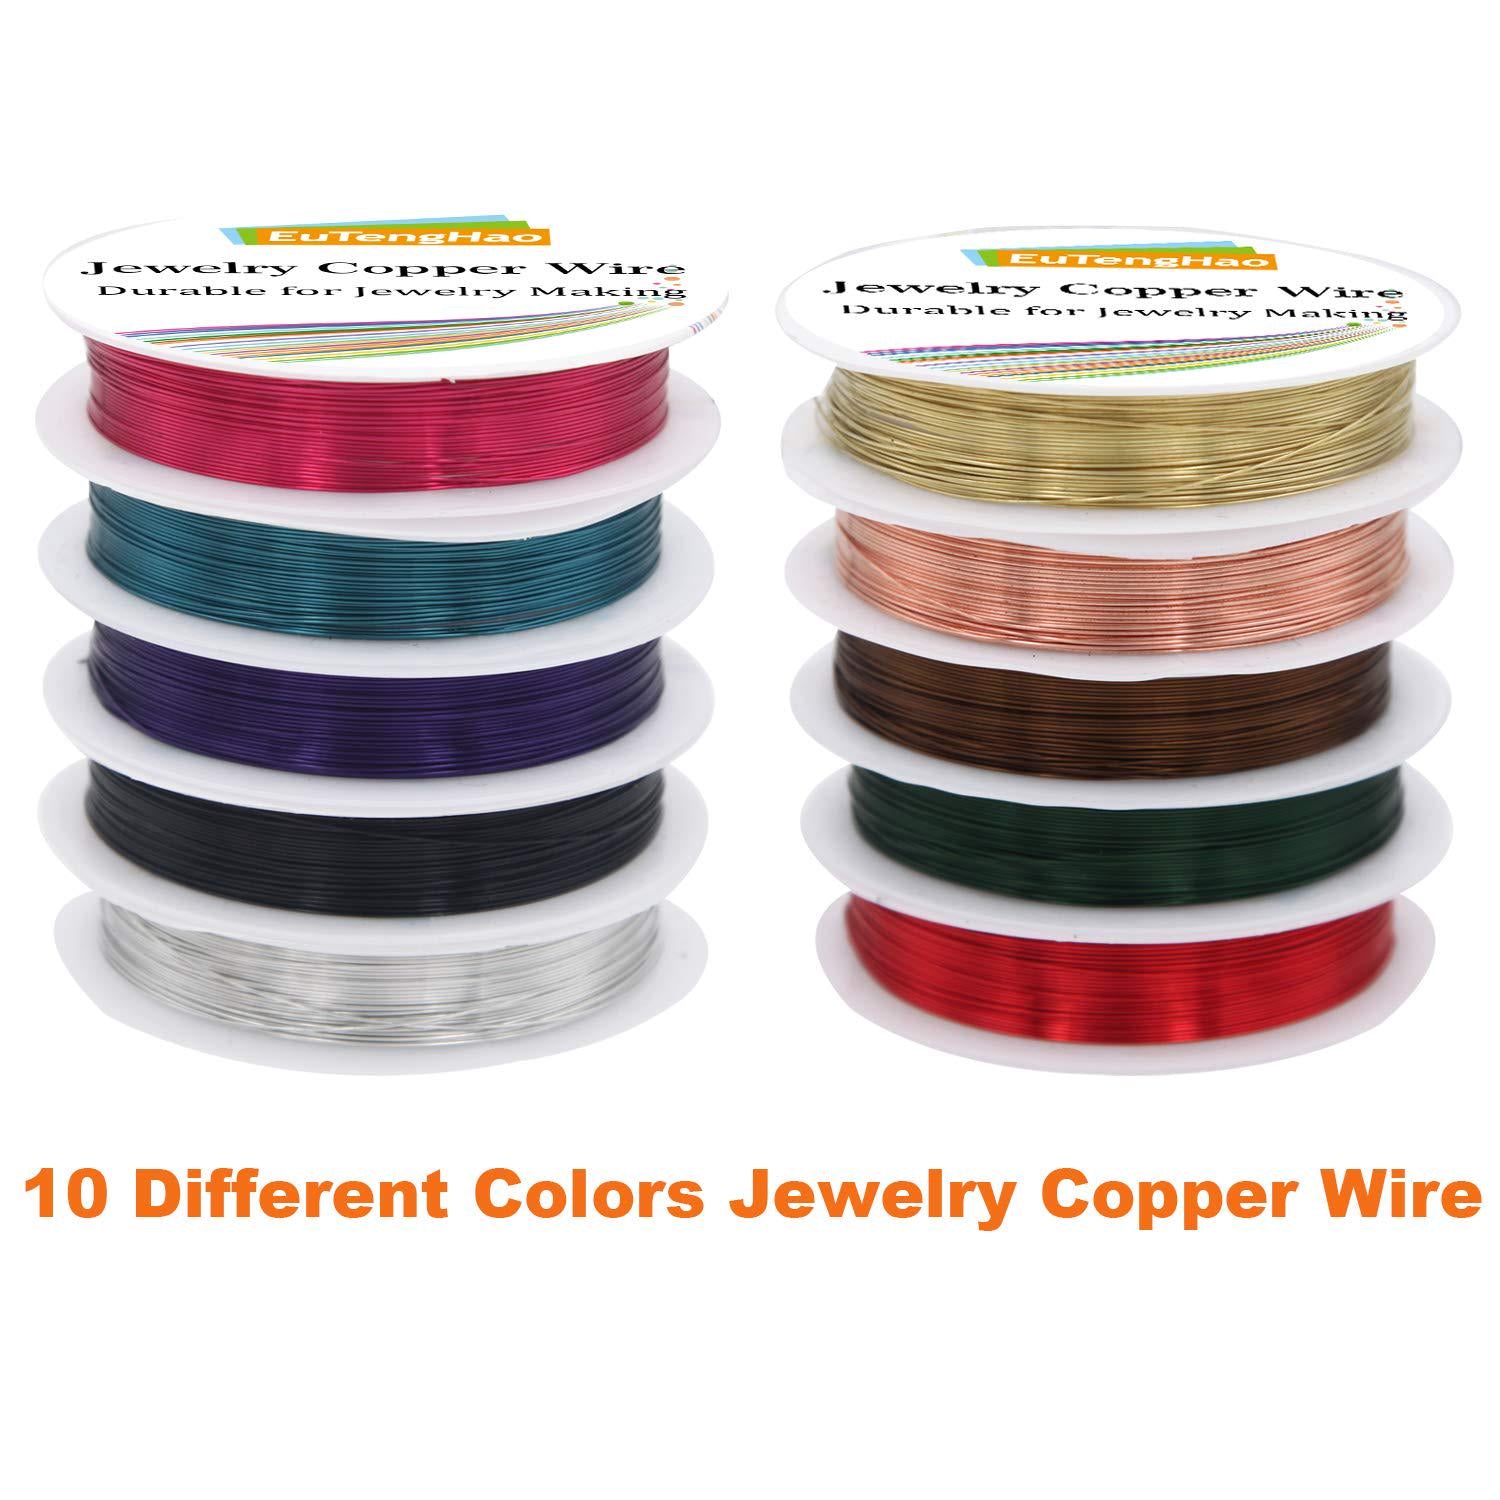 EuTengHao, EuTengHao 10 Packs Jewelry Copper Wire Craft Jewelry Beading Wire for Bracelet Necklaces Earring Jewelry Making Supplies (10 Colors,26 Gauge)